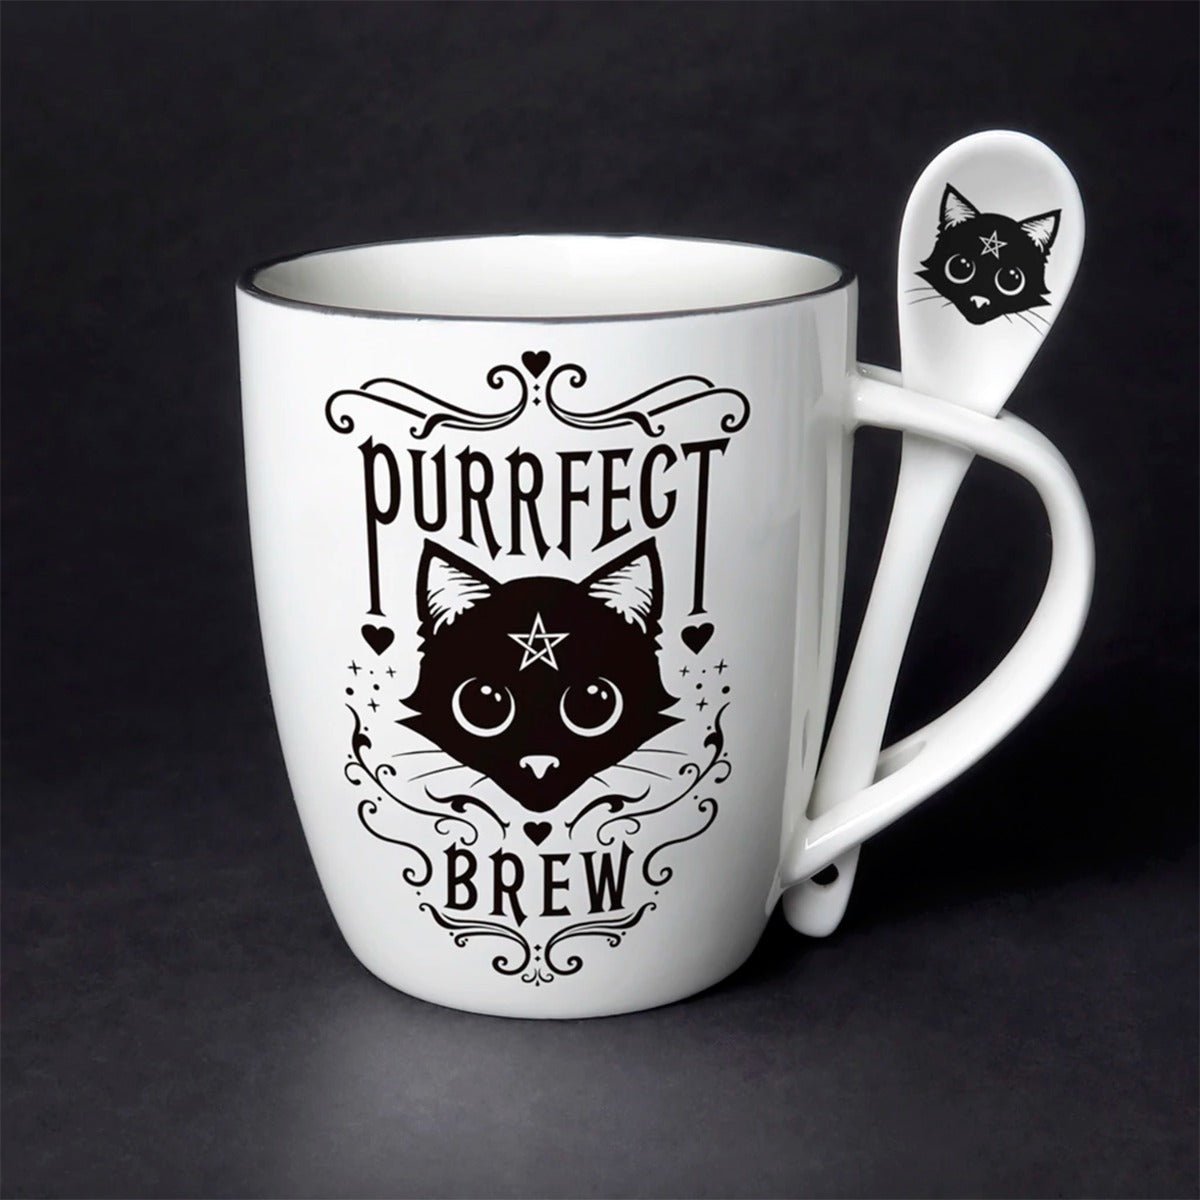 Purrfect Brew Cup and Spoon Set - 13 Moons